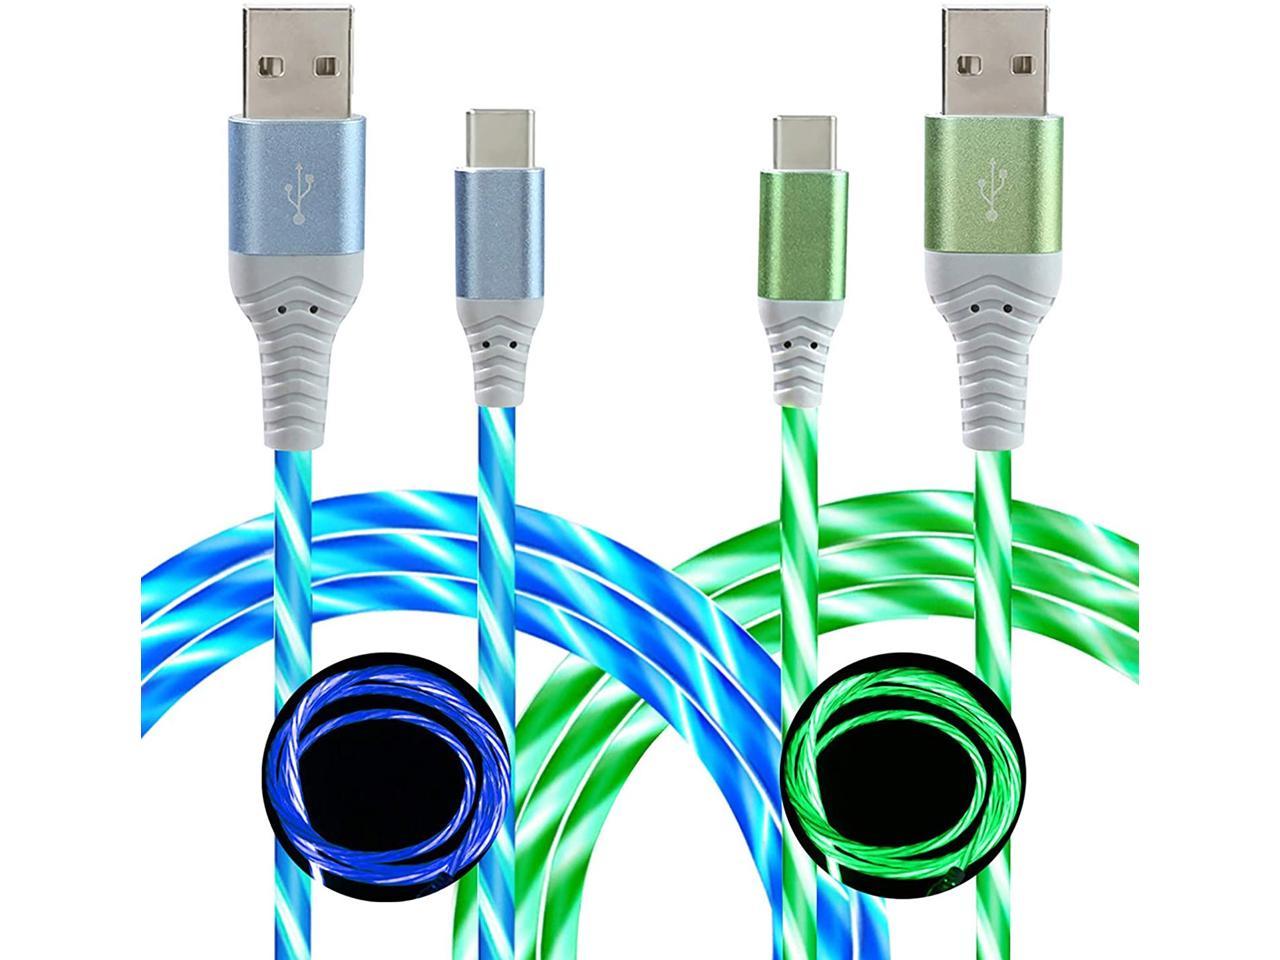 Light Up USB Charging Cable 3.28ft/1m USB Type C Cable Led USB Cable Flash Light Flowing for Samsung Galaxy S10 S9 S8 Plus Note 9 8/ LG V30 V20 G6 G5/More Android Phone 